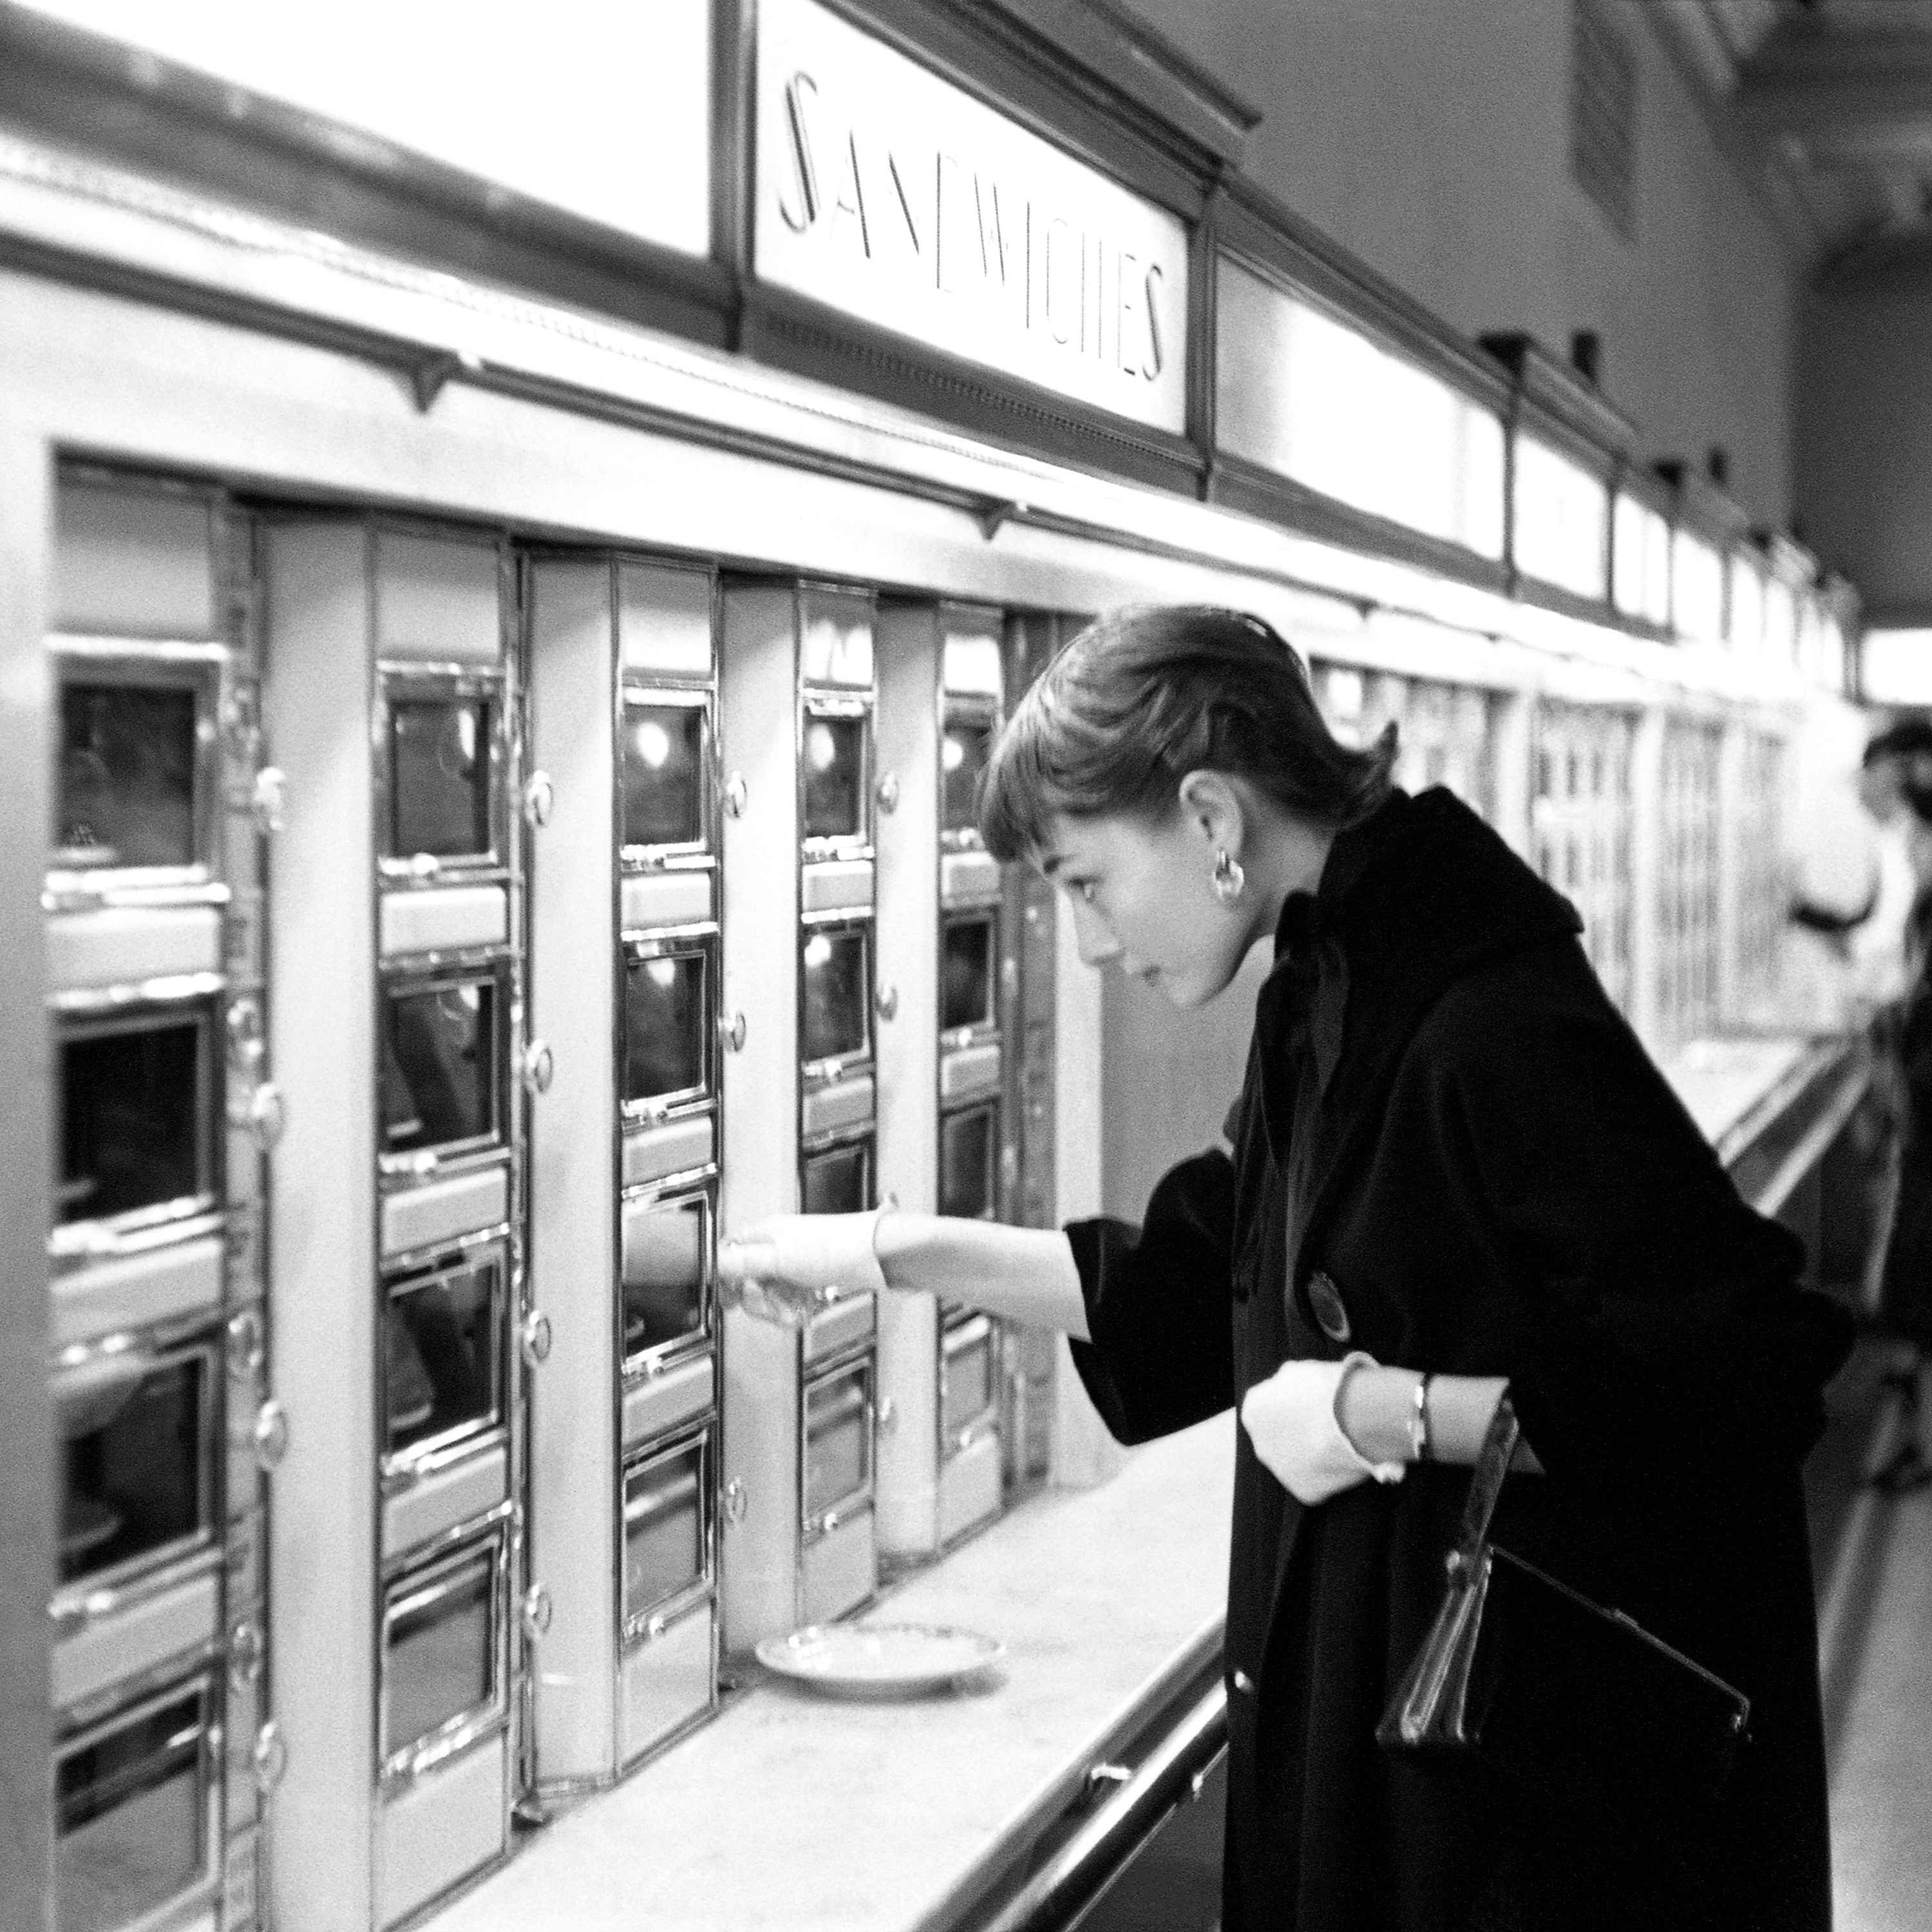 The Automat: The Amazing Story of America’s Five-Cent Cafeteria